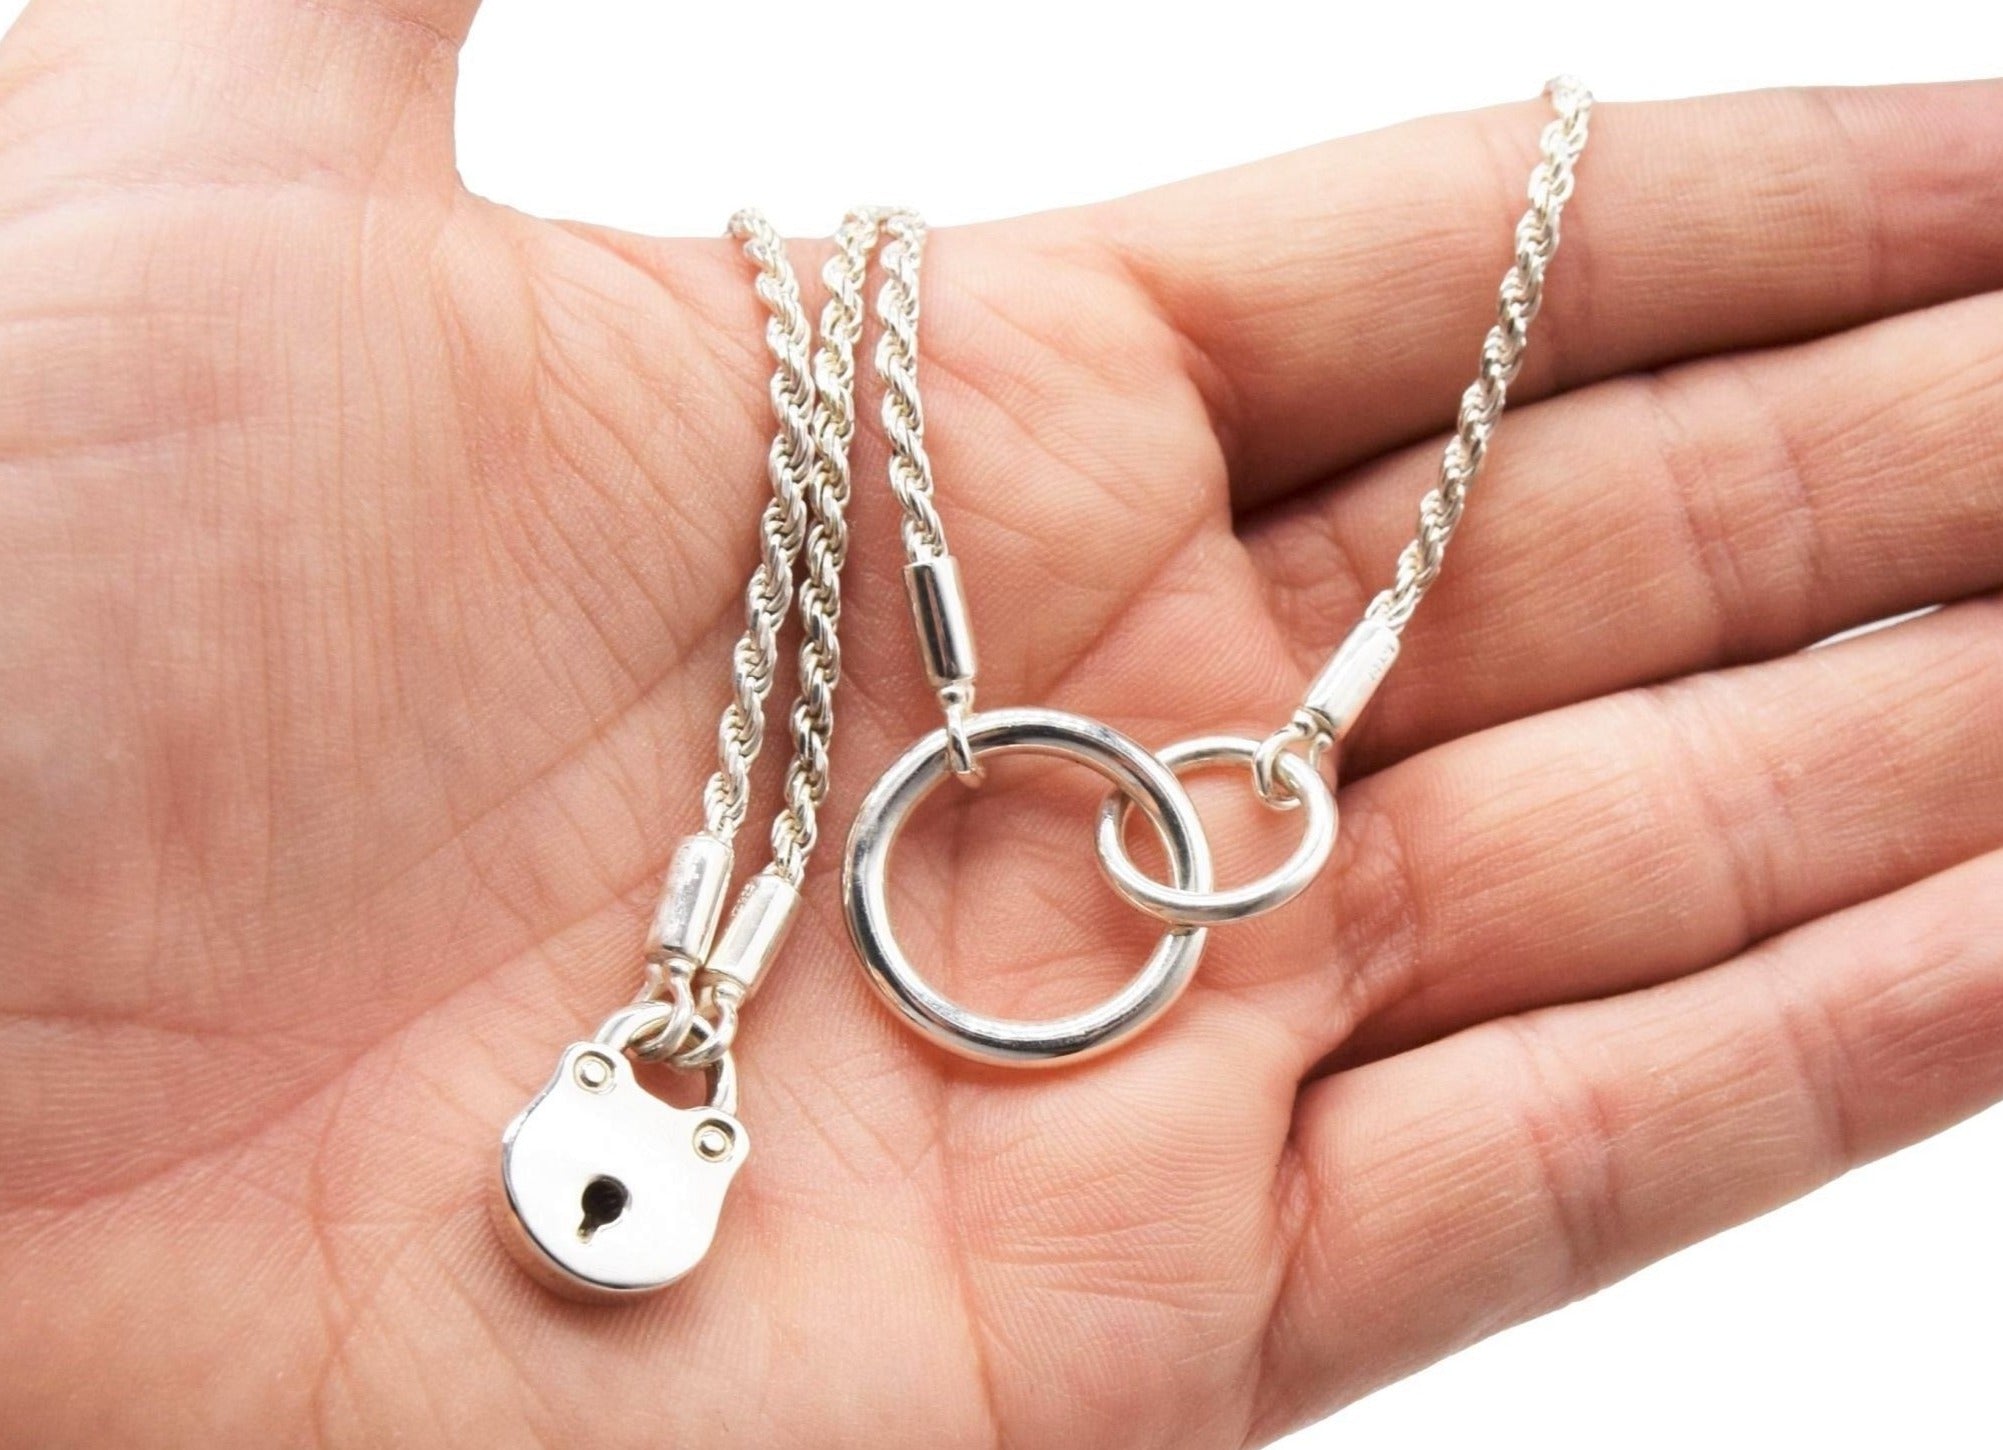 BDSM Locking Day Collar Jewelry Necklace of Lock and O ring with large sterling bell available in solid 316L Stainless Steel or 925 sterling silver shown on a model's hand